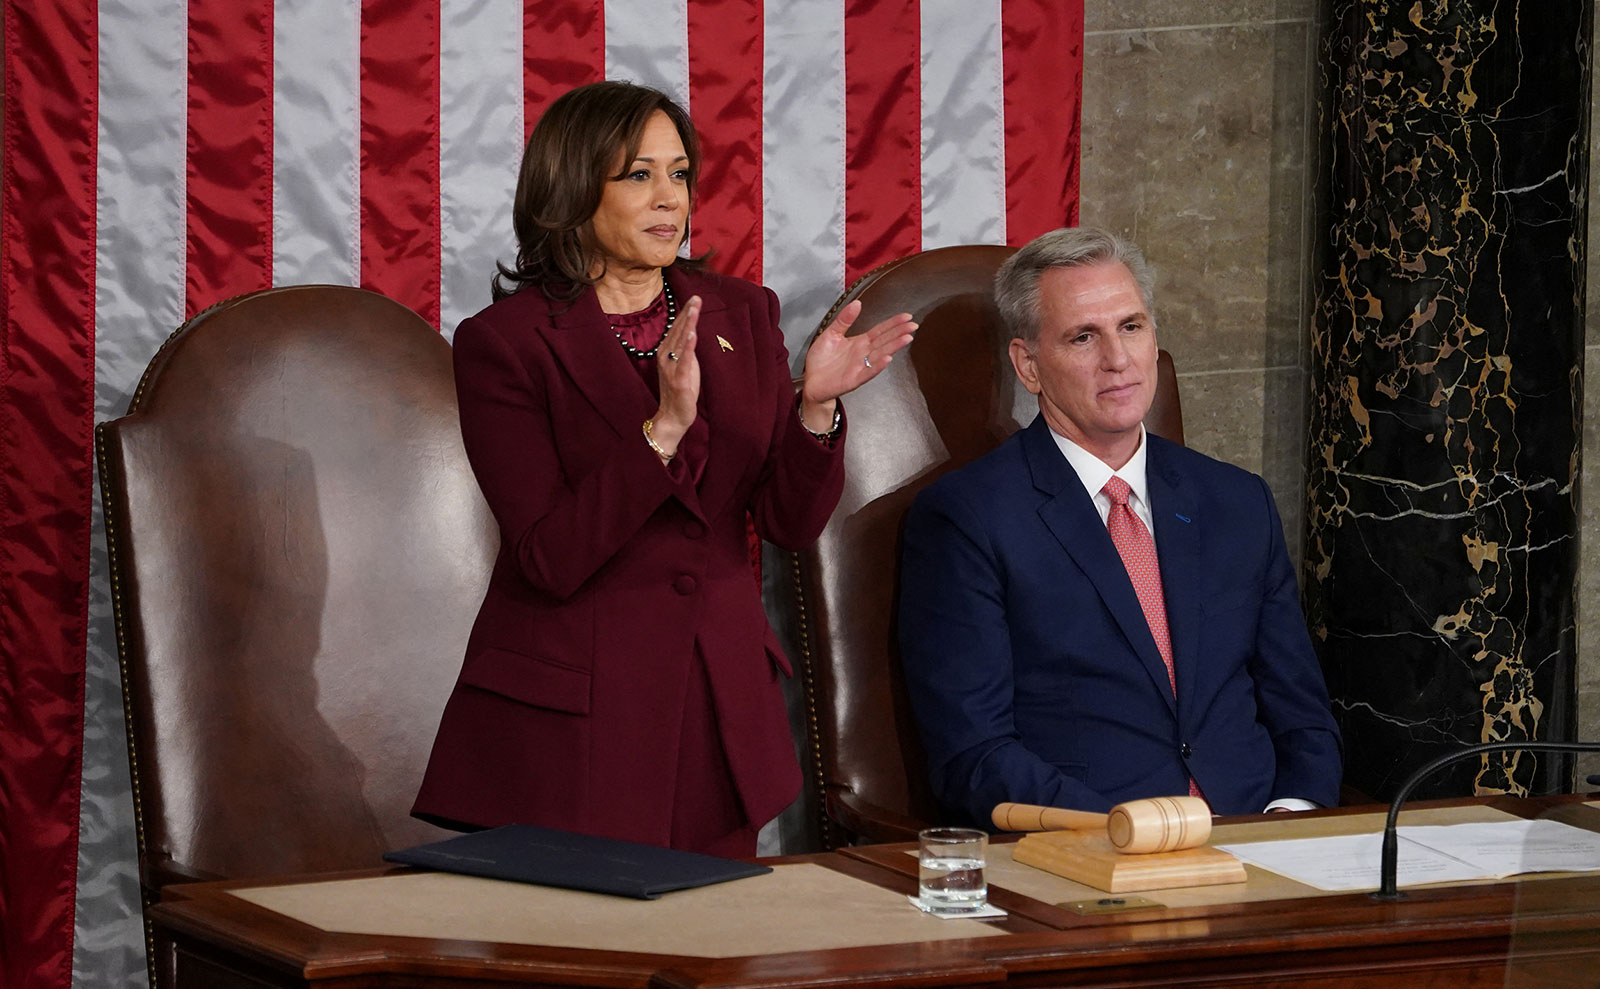 Vice President Kamala Harris stands and applauds as House Speaker Kevin McCarthy remains seated.